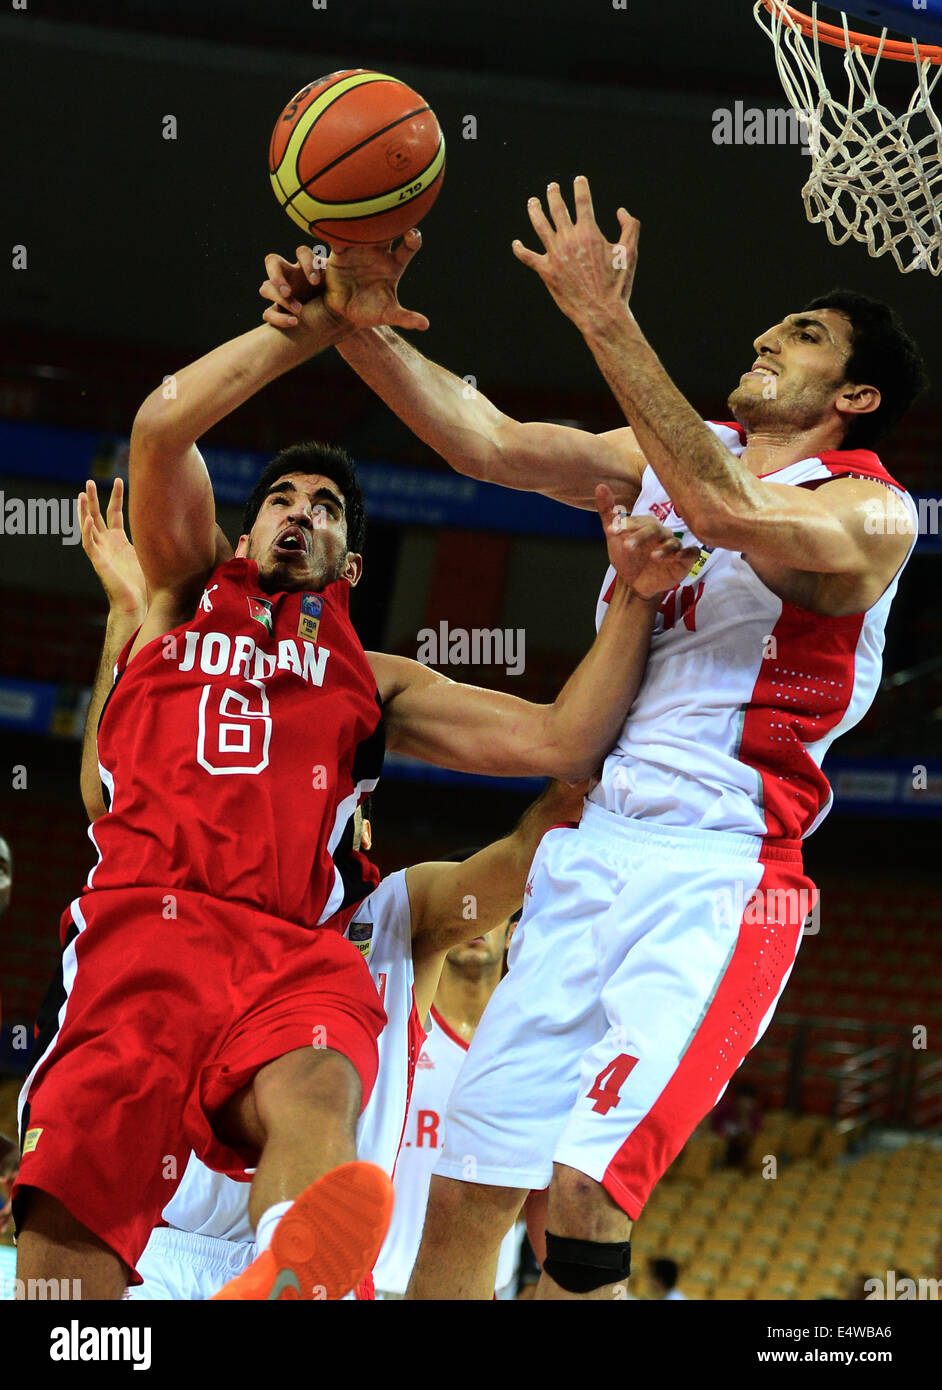 Wuhan, China's Hubei Province. 17th July, 2014. Al Dwairi Ahmad H. A. (L) of Jordan's men's basketball team competes during the quarterfinal match against Iran at the 5th FIBA Asia Cup in Wuhan, capital of central China's Hubei Province, July 17, 2014. Iran won 75-60 and advanced to the semifinal. © Cheng Min/Xinhua/Alamy Live News Stock Photo